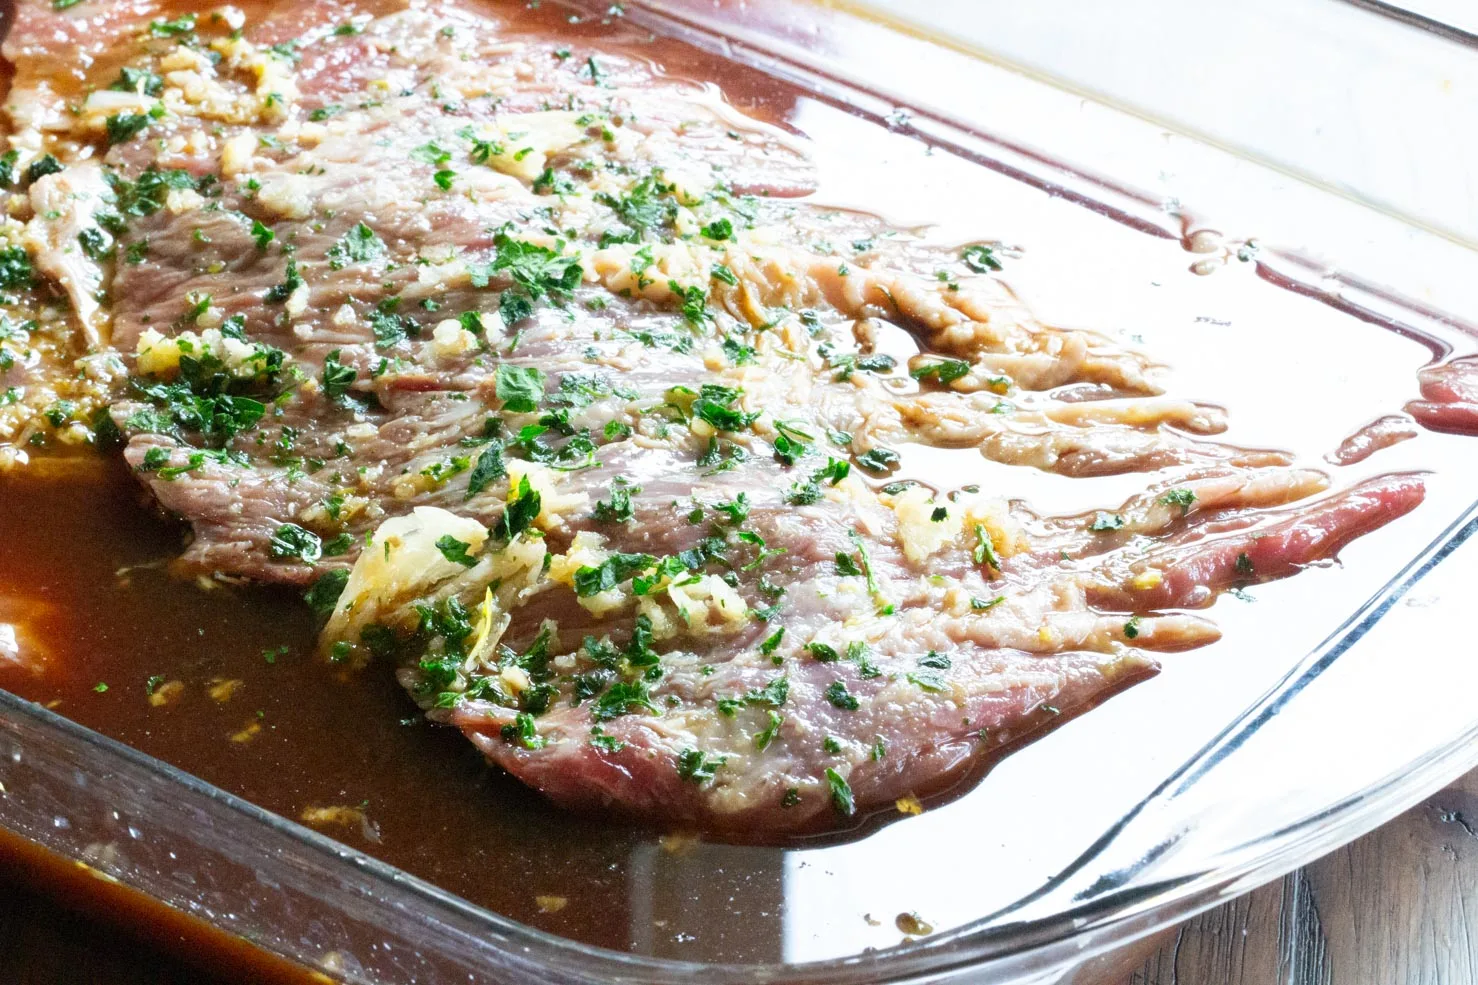 Sprinkling the skirt steak with cilantro adds beauty